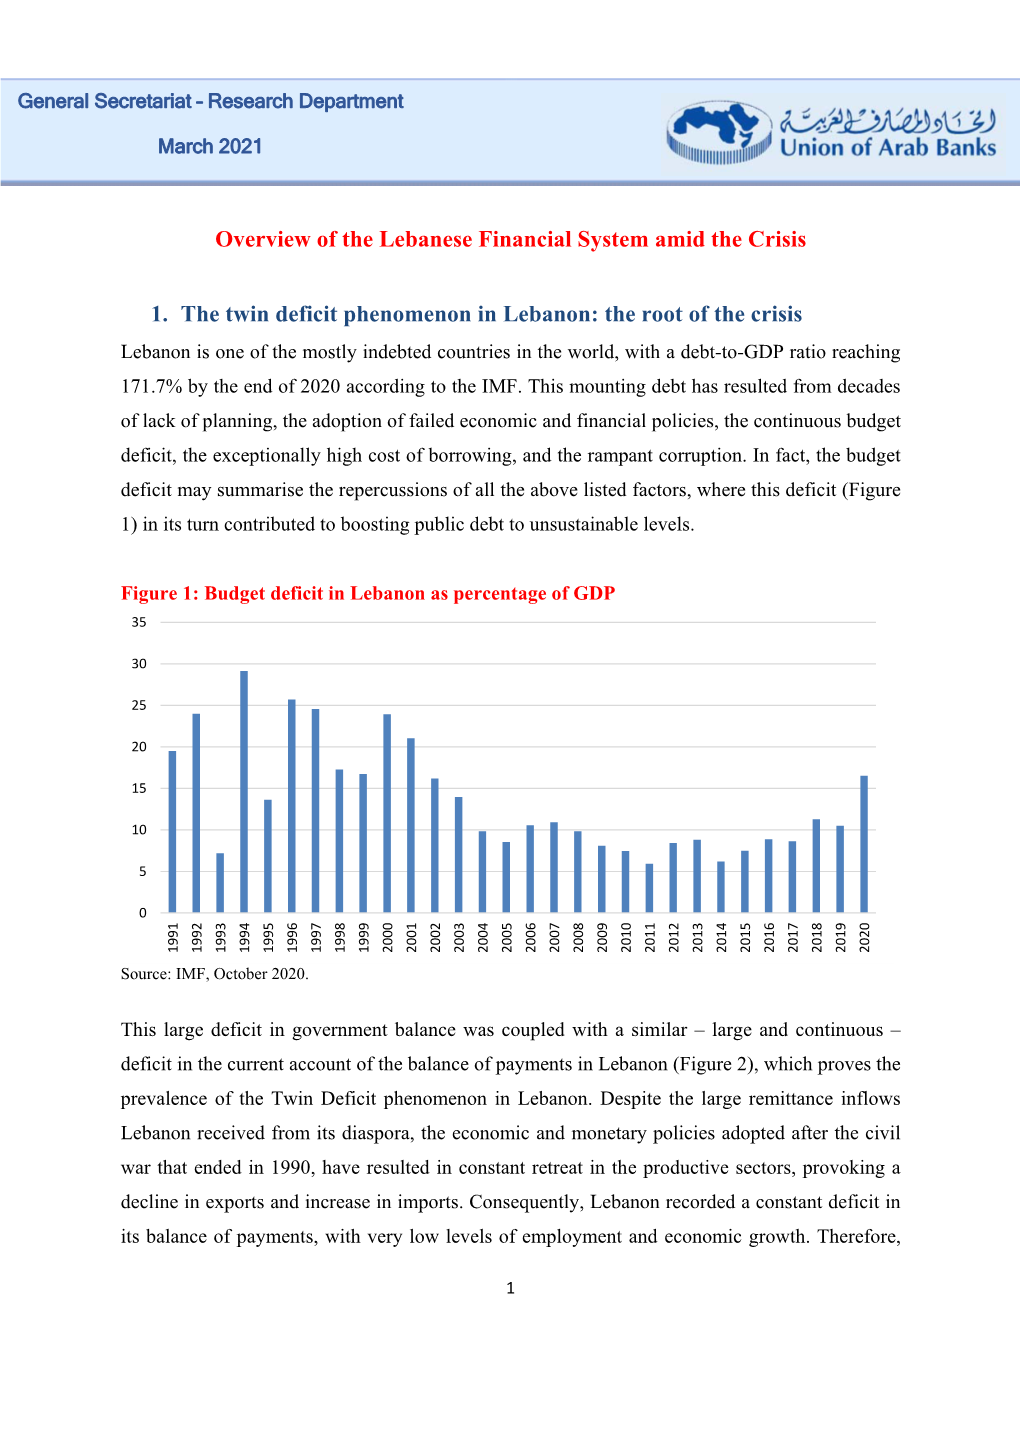 Overview of the Lebanese Financial System Amid the Crisis 1. the Twin Deficit Phenomenon in Lebanon